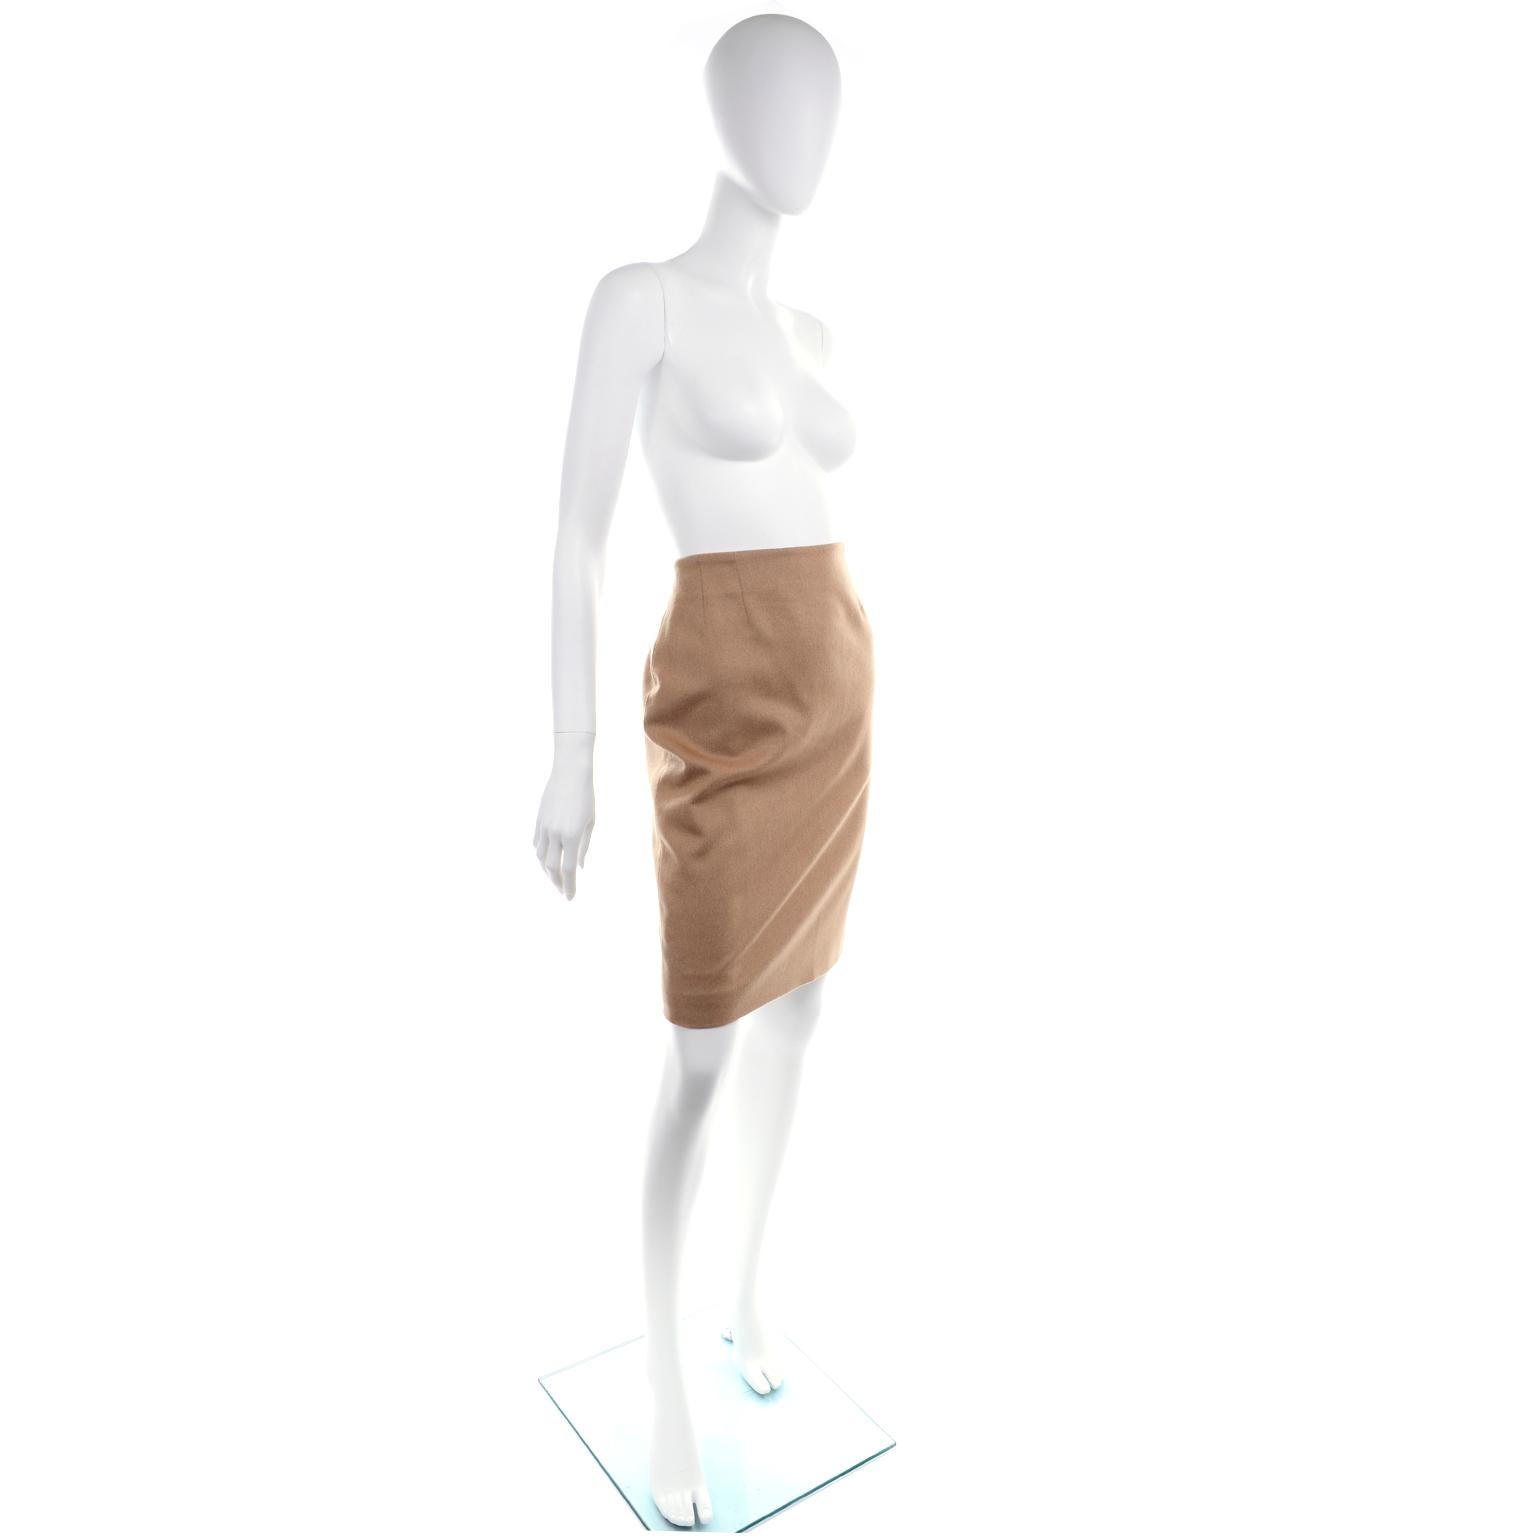 Christian Dior Paris Camel Pencil Skirt With Back Buttons & SIlk Lining Size 8 In Excellent Condition For Sale In Portland, OR